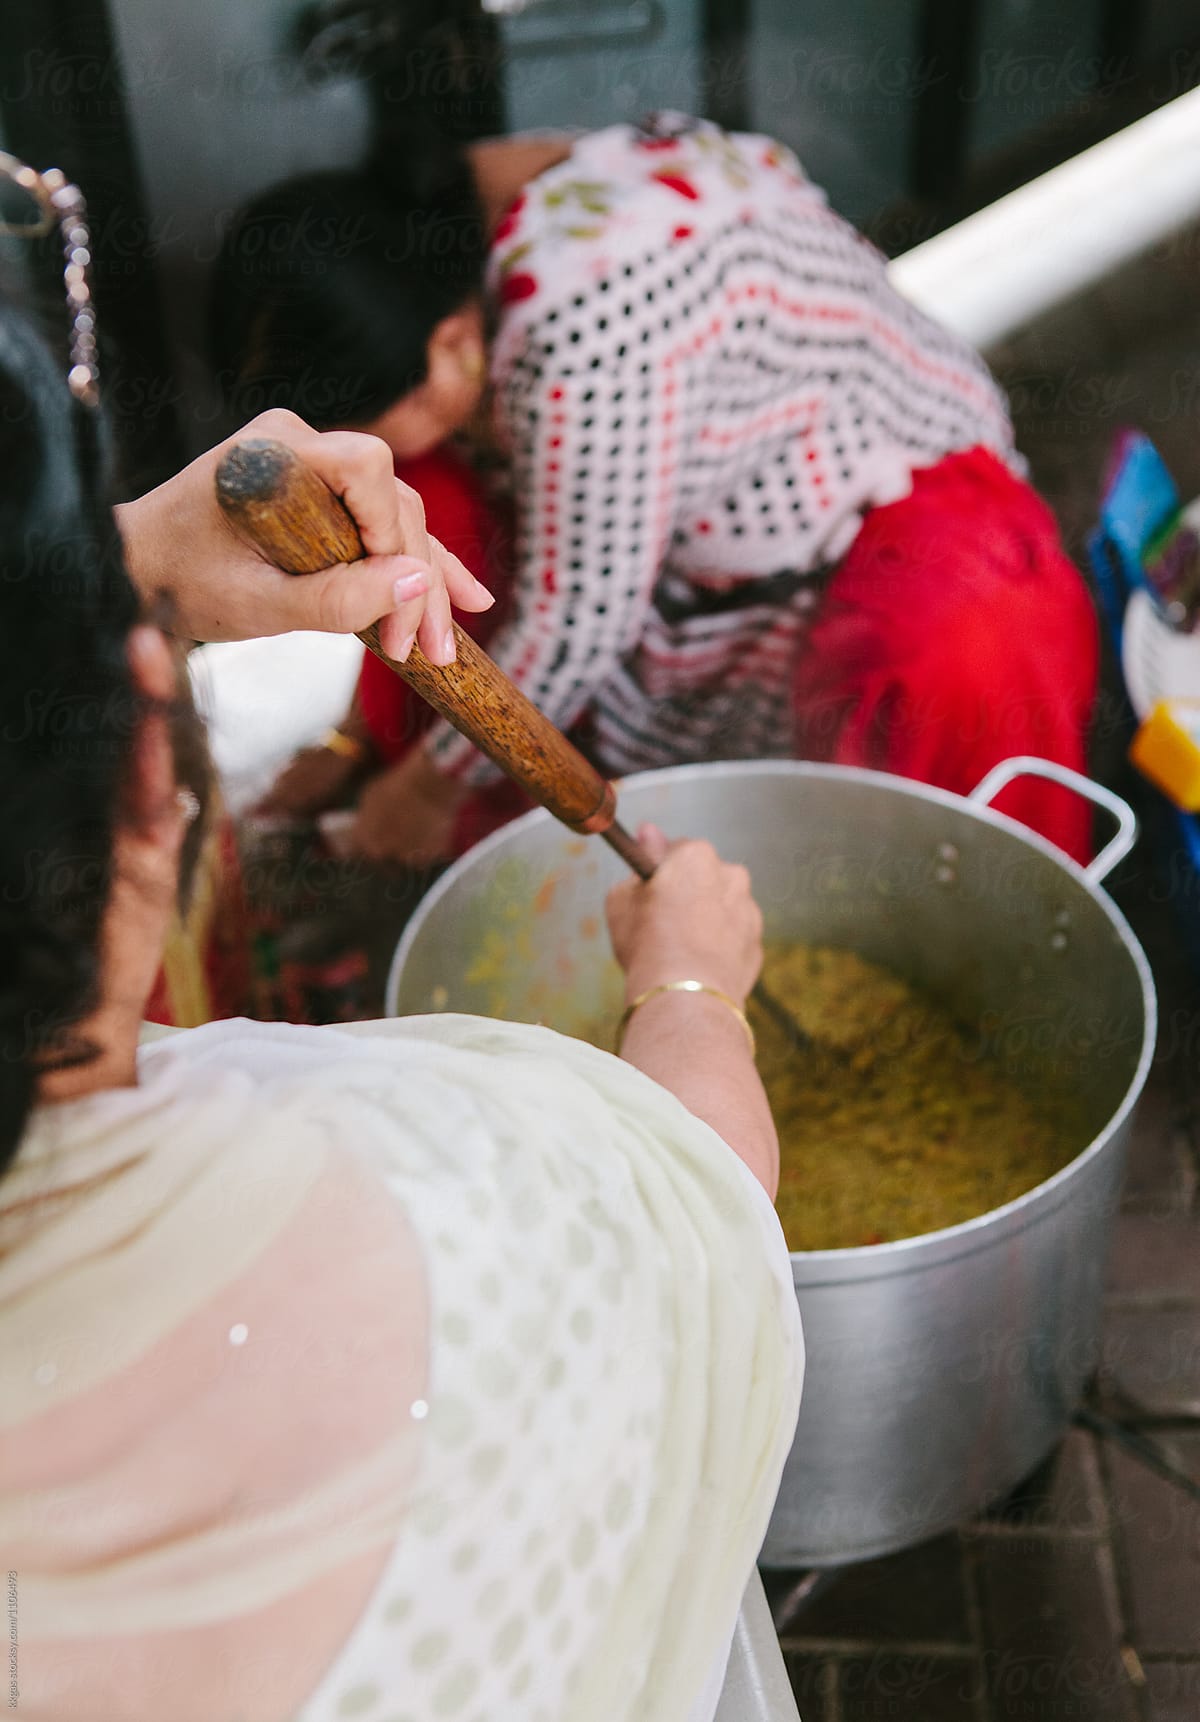 Twp Indian women cooking a large quantity of food